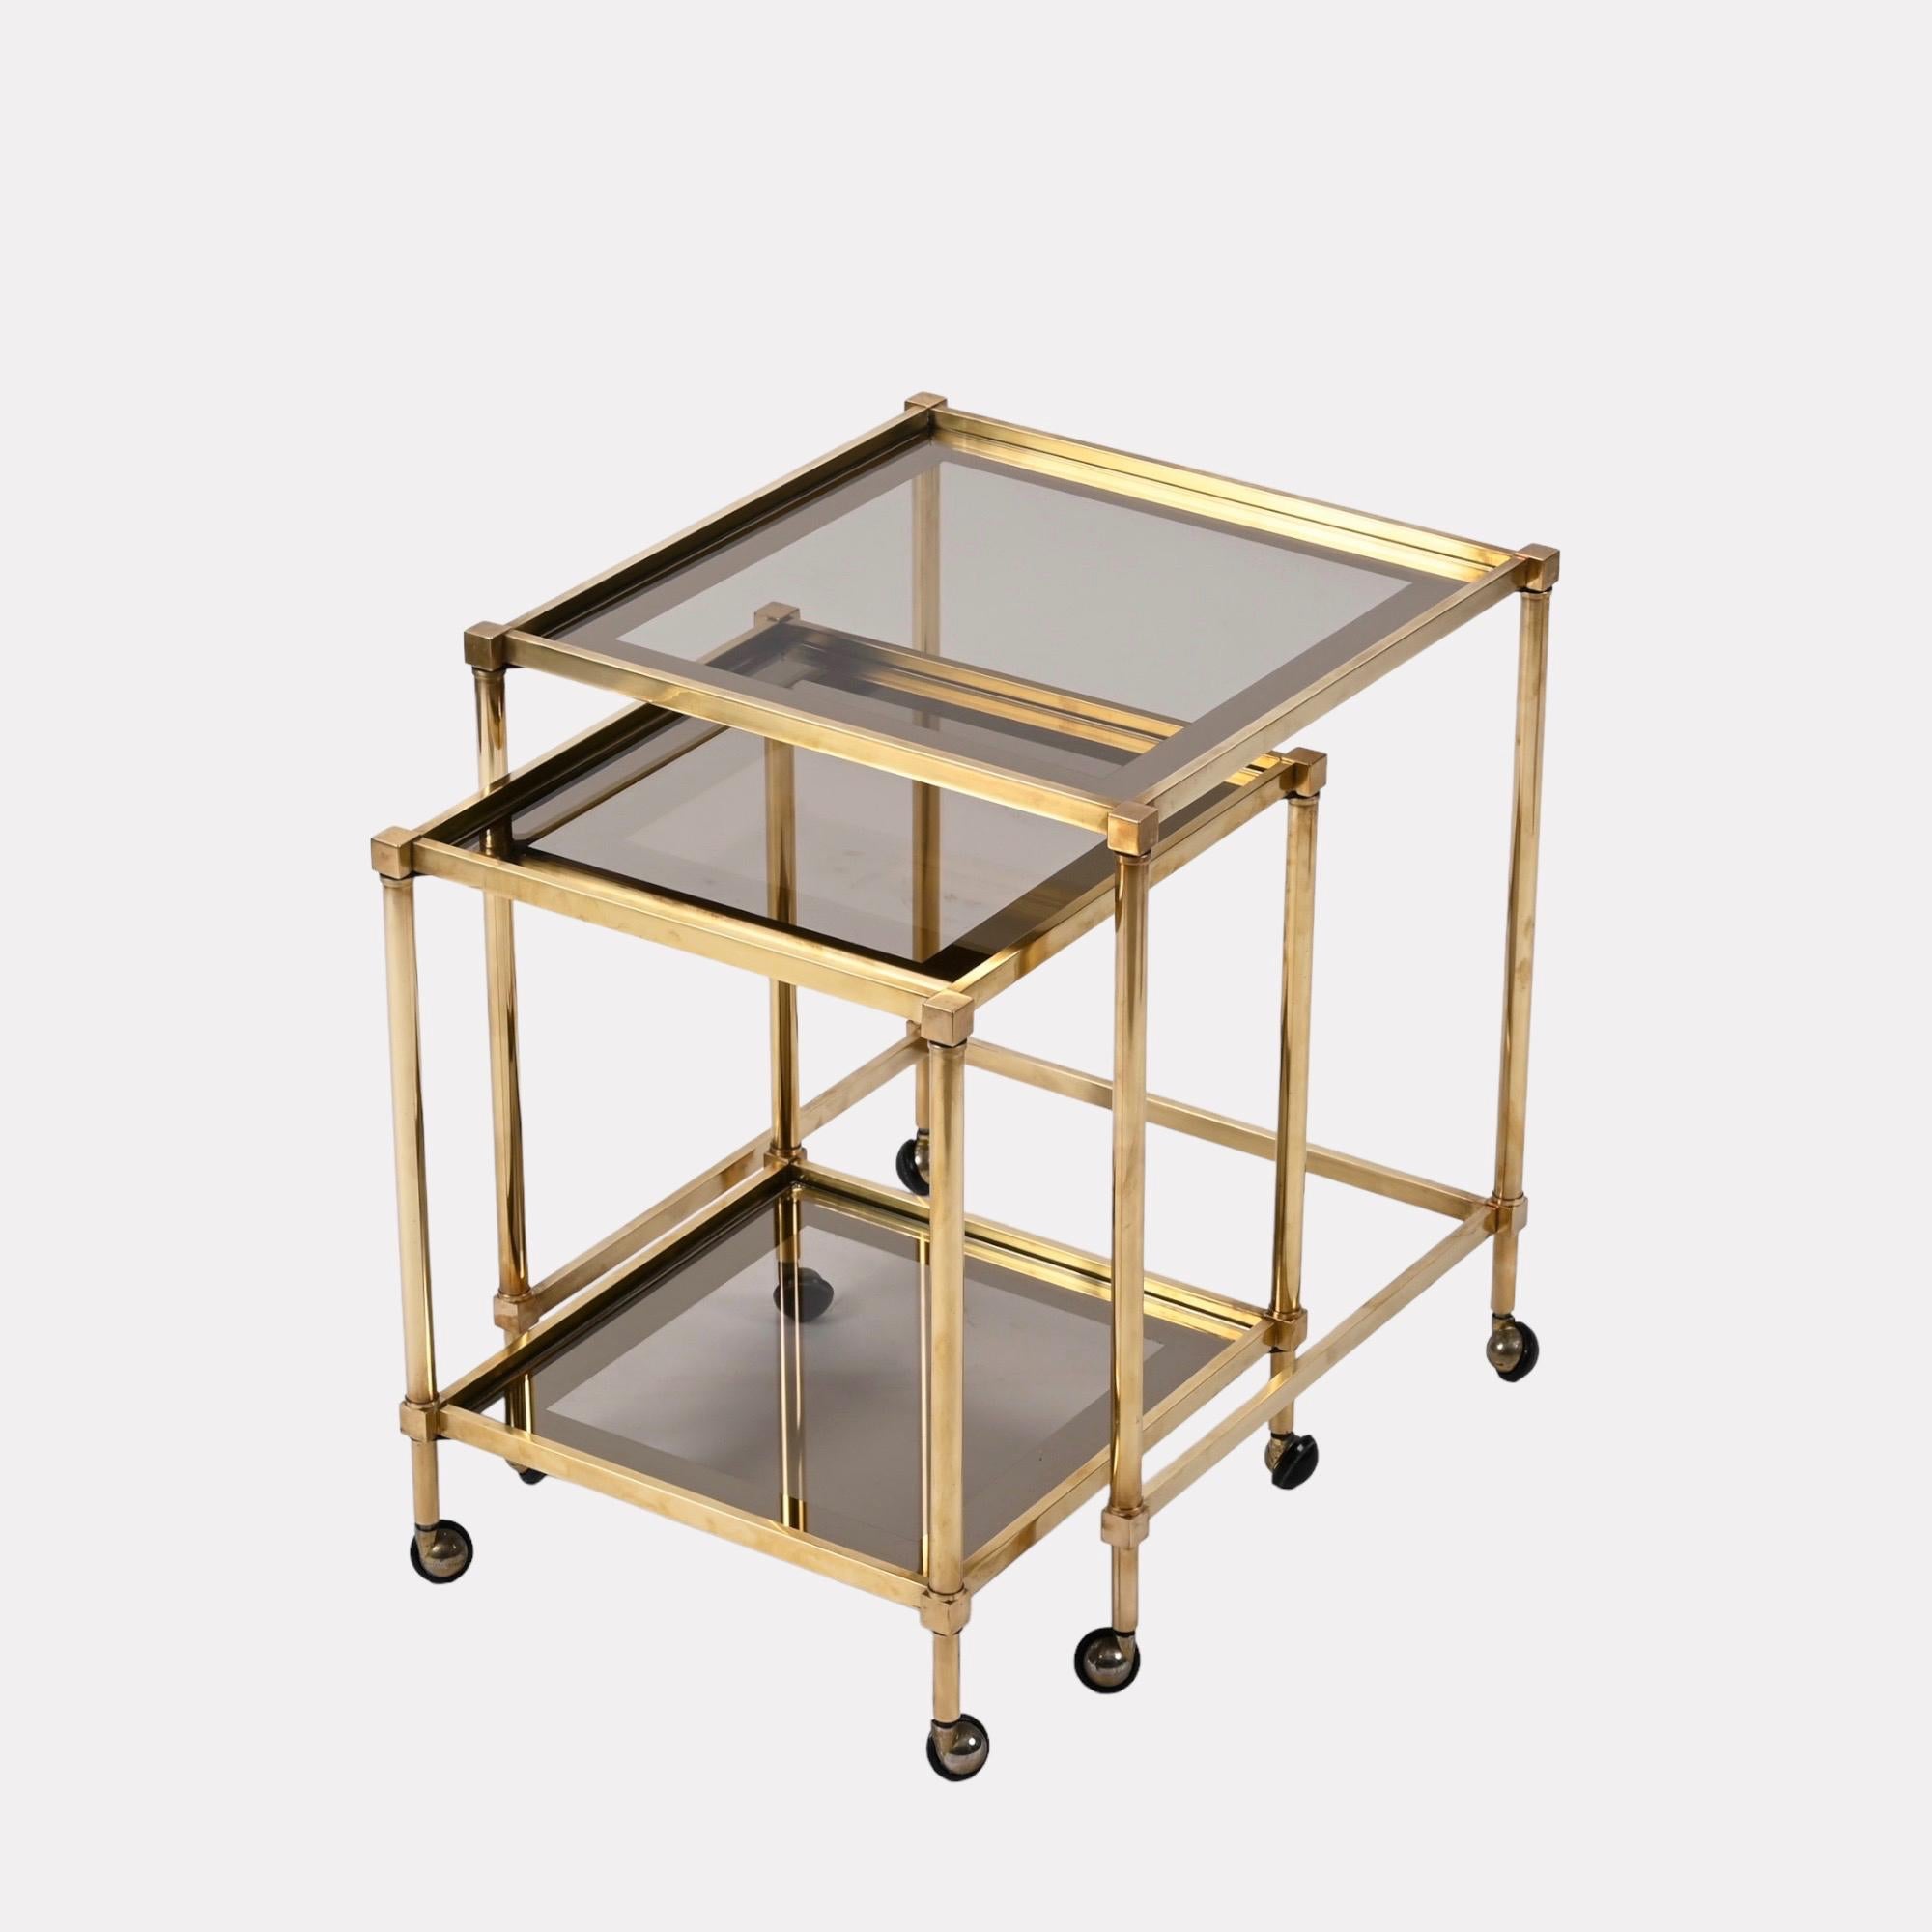 Pair of Maison Jansen Brass Mirrored Border Nesting Tables with Glass Top, 1970s For Sale 5